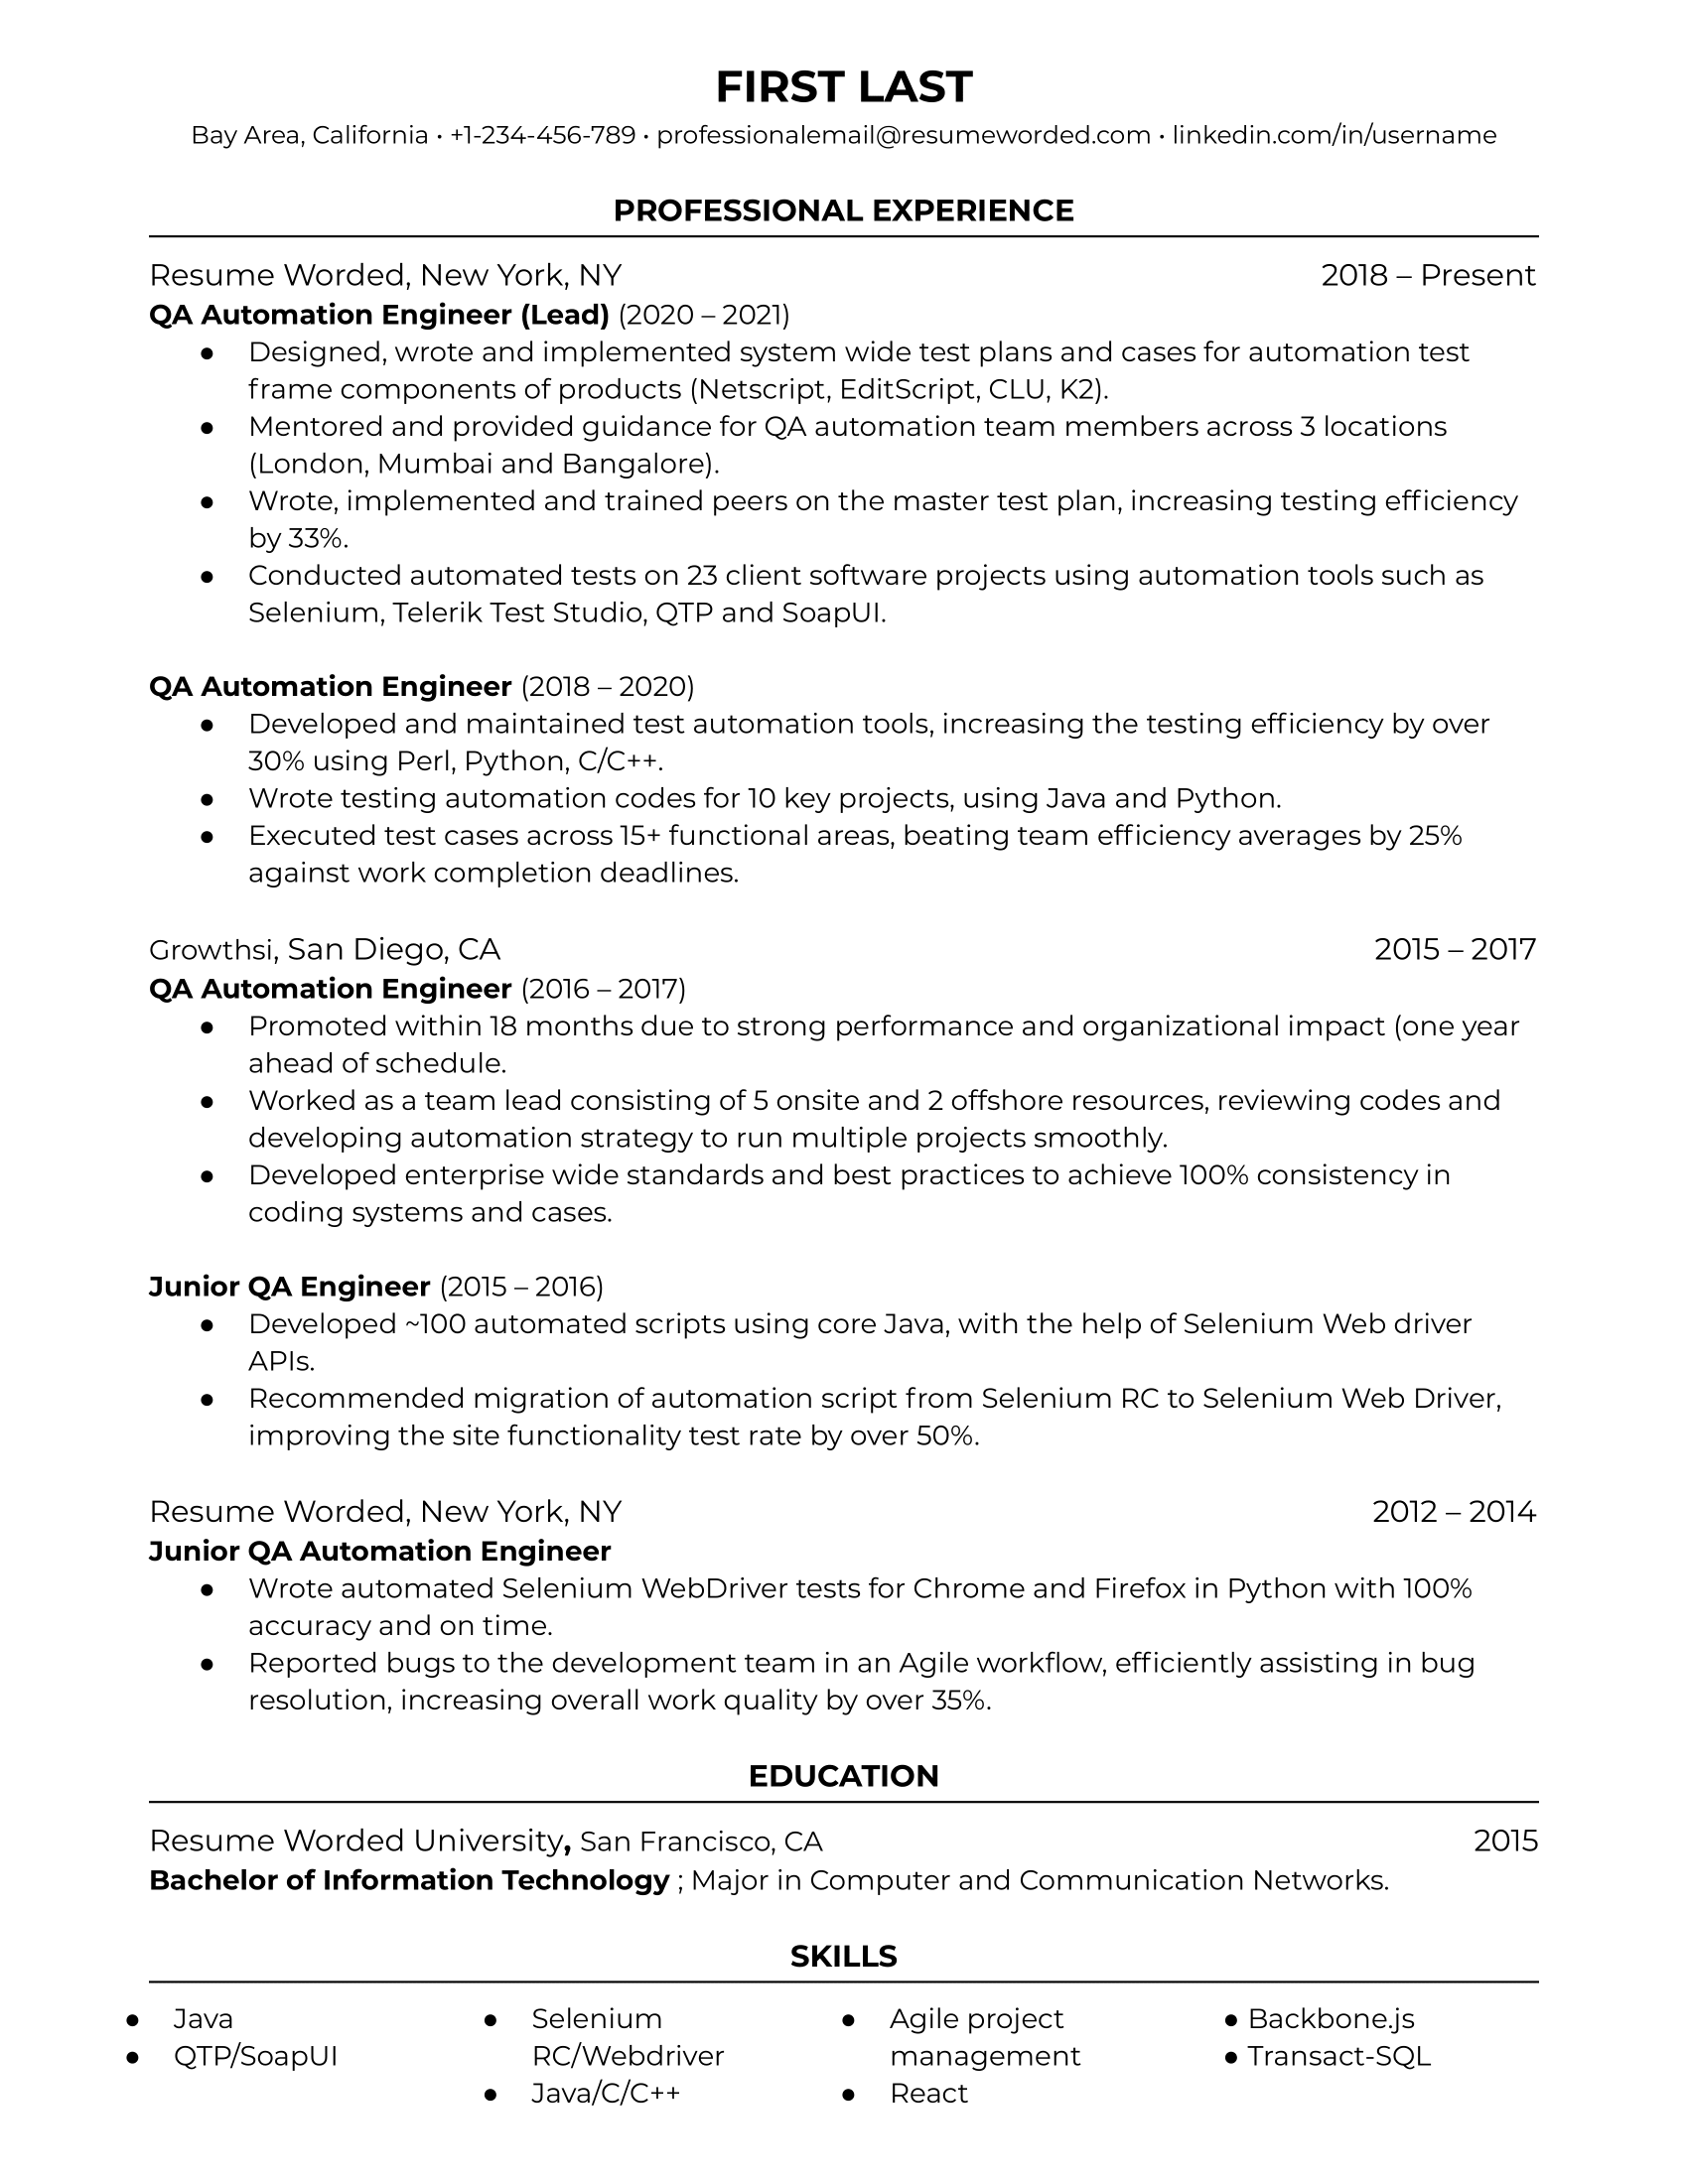 QA (Quality Assurance) Automation Engineer Resume Template + Example